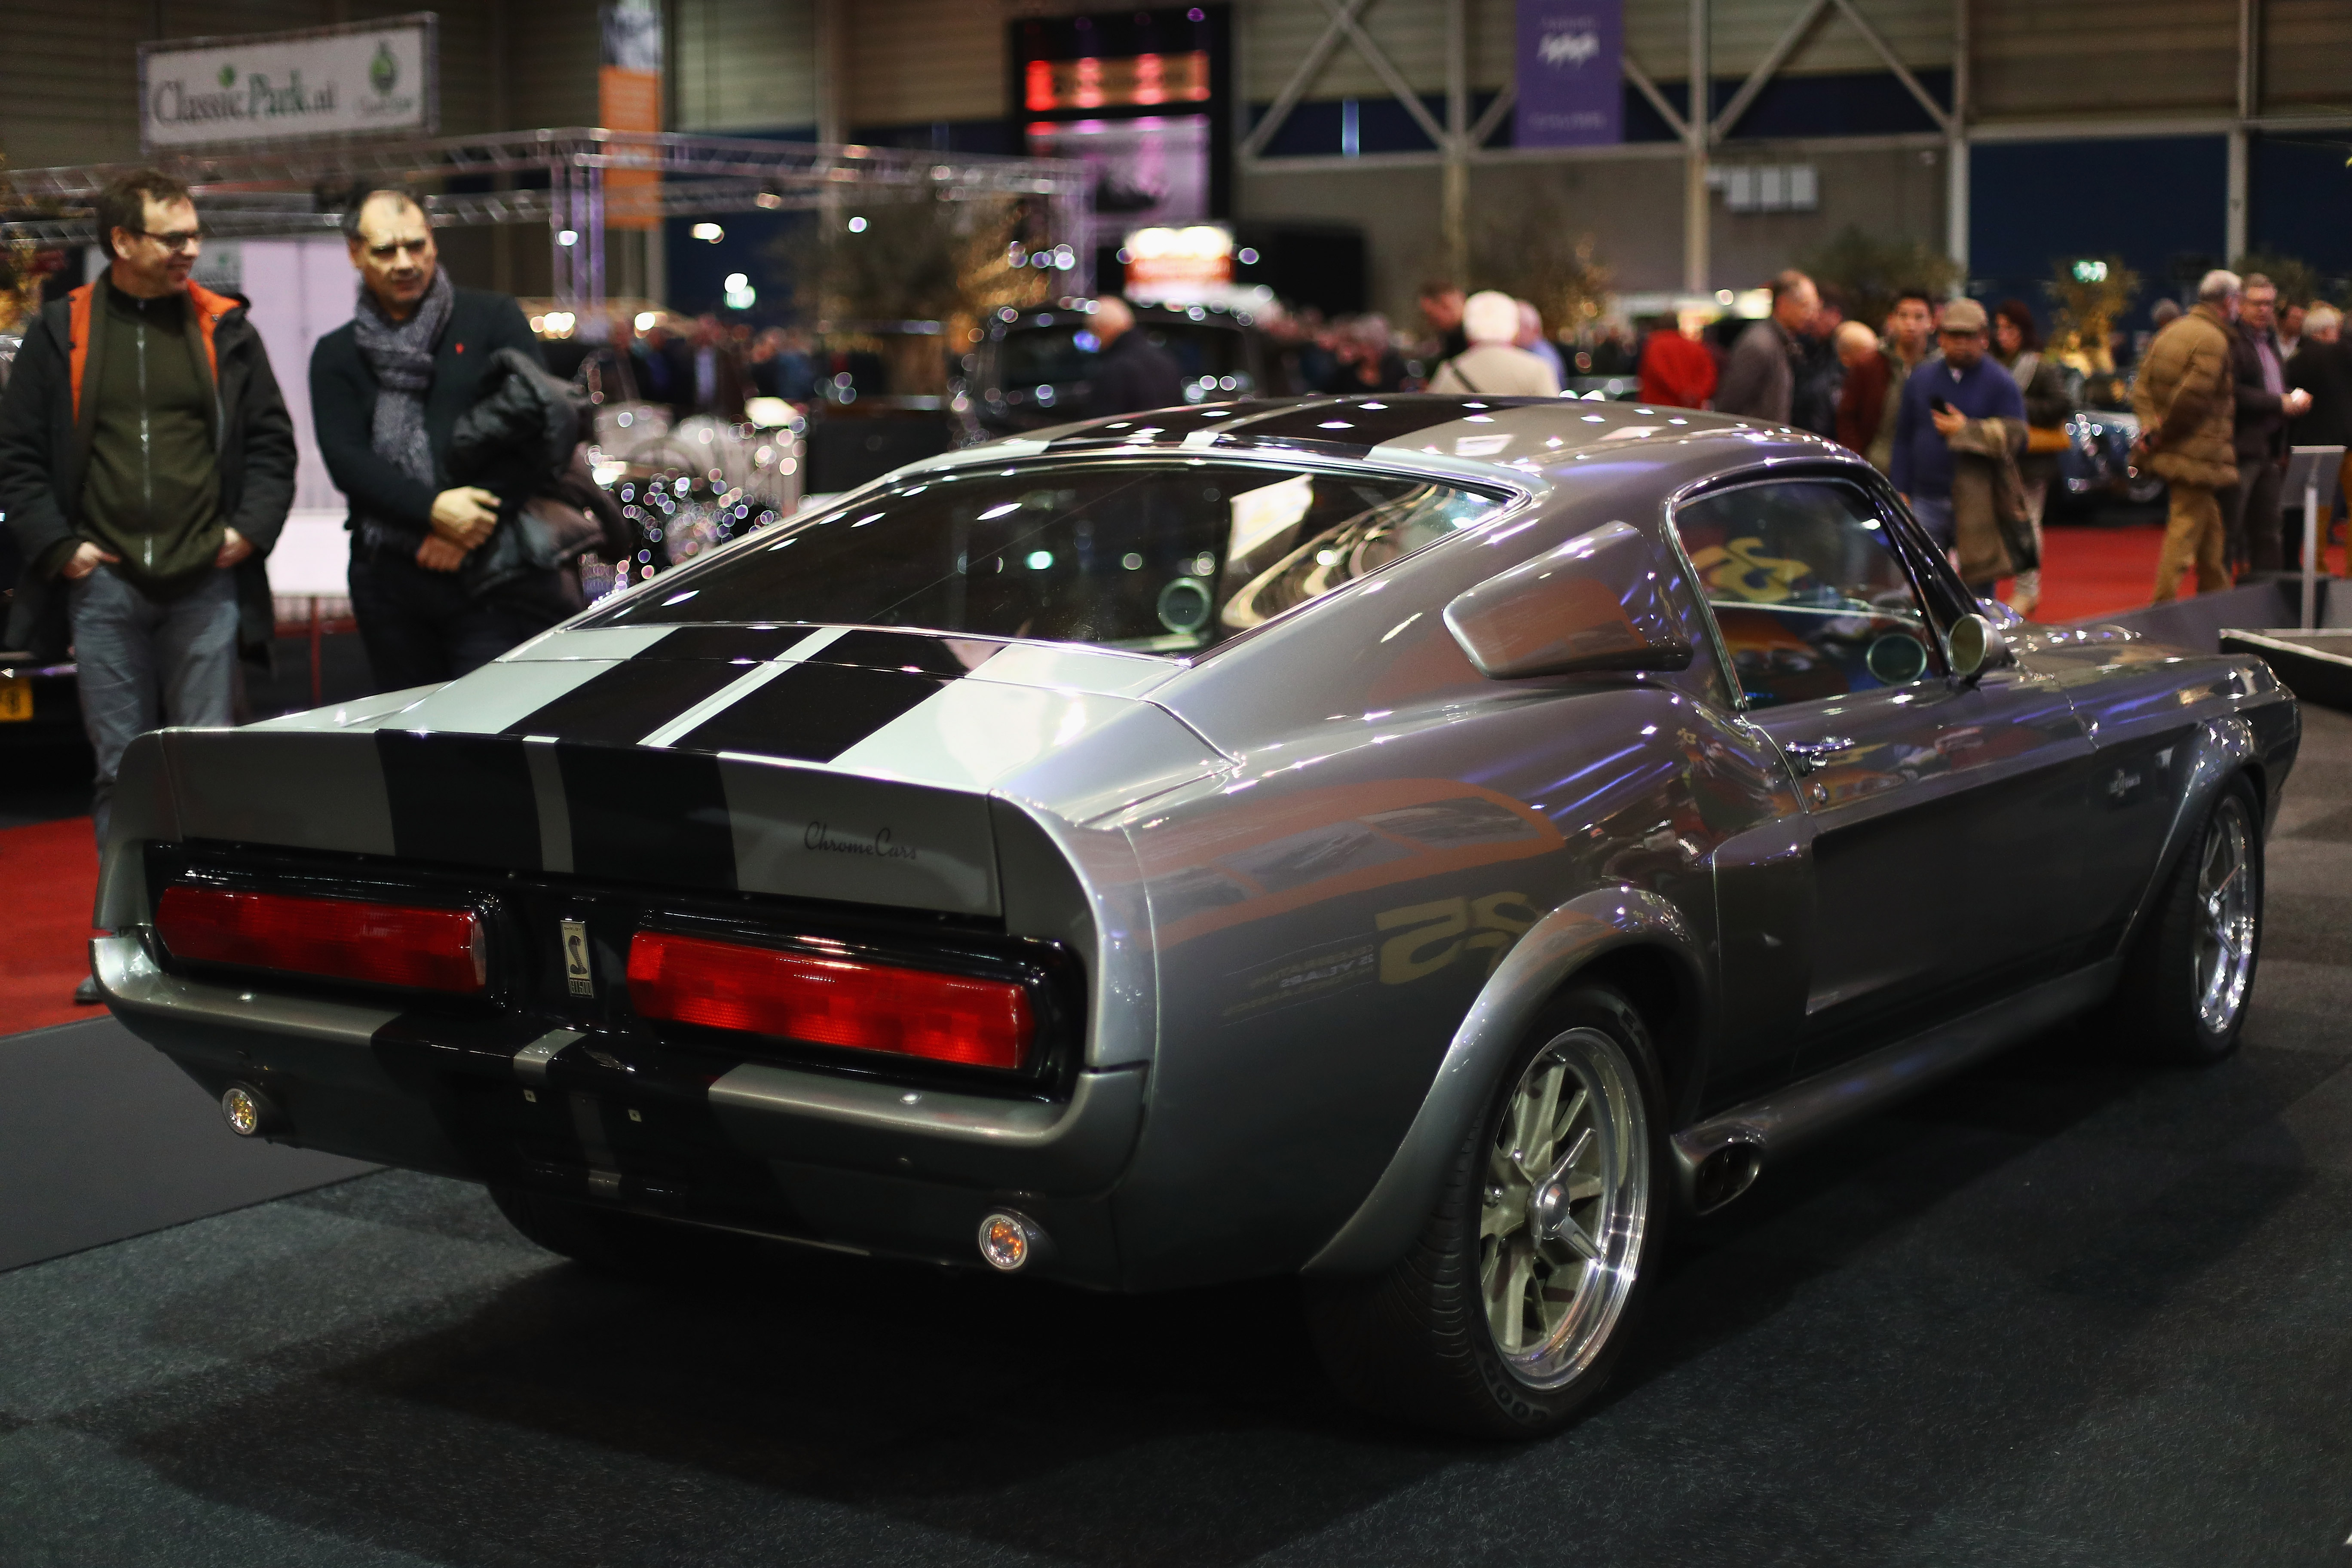 A detailed view of the 1967 Ford Shelby Mustang GT500 know as Eleanor from the movie or Hero Car in, Gone in 60 Seconds during the 25th edition of InterClassics Maastricht held at MECC Halls on January 12, 2018 in Maastricht, Netherlands. Exhibitors and participants will be showing classic cars, engines, restoration equipment and supplies, new and used accessories, interiors, maintenance materials, literature, models, objects of art with the theme "classic race cars" plus club stands and museum representation.  (Photo by Dean Mouhtaropoulos/Getty Images)